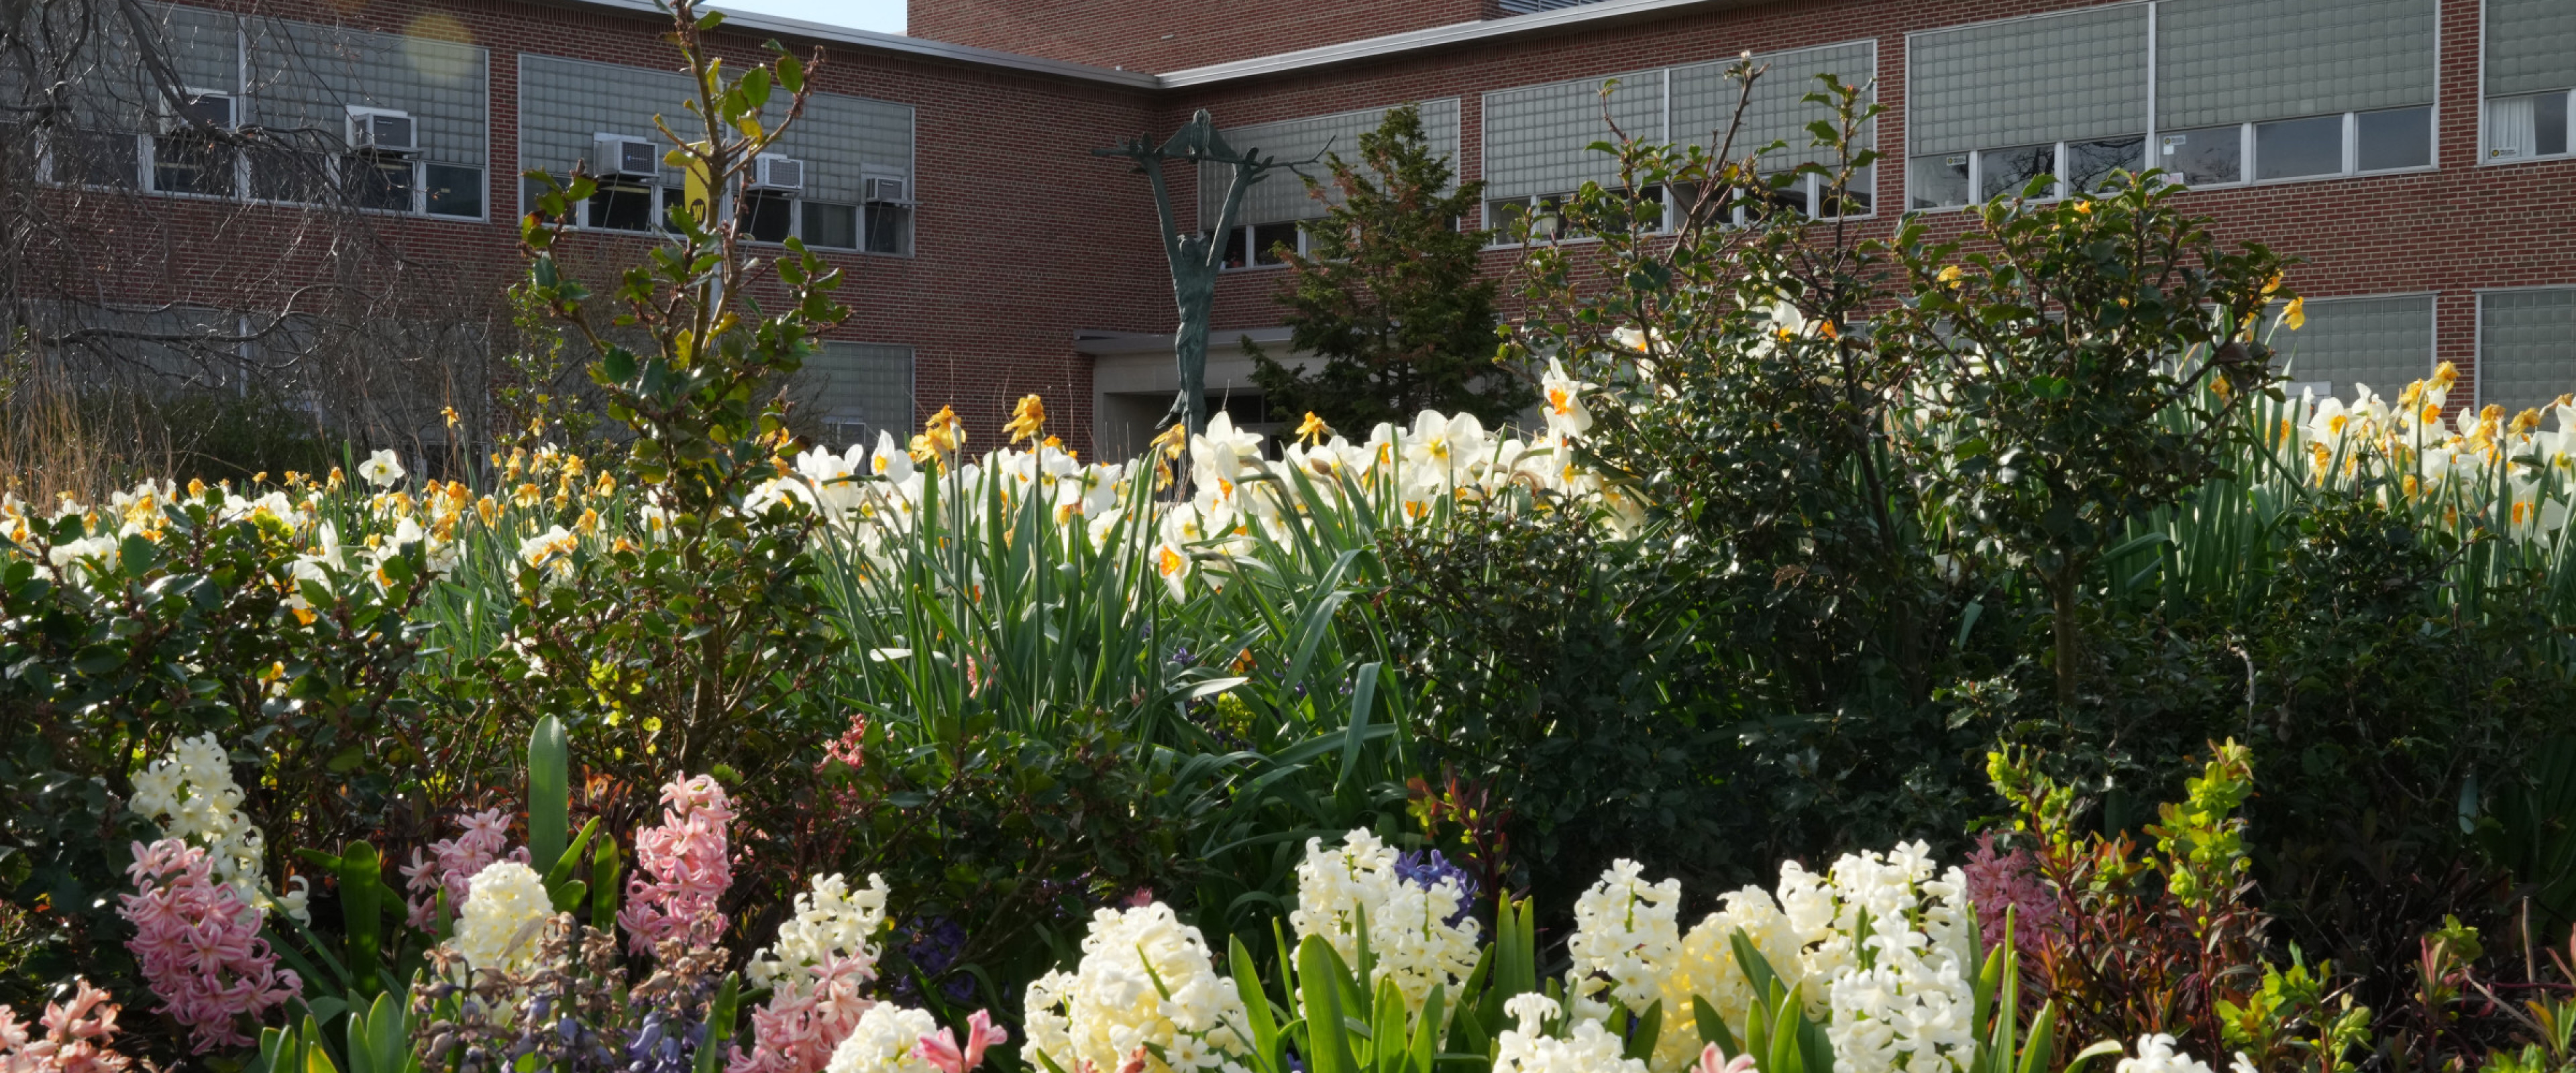 Plant life is in bloom all across Western’s Main Campus. The Seibert Administration Building is seen behind a beautiful assortment of flowers.